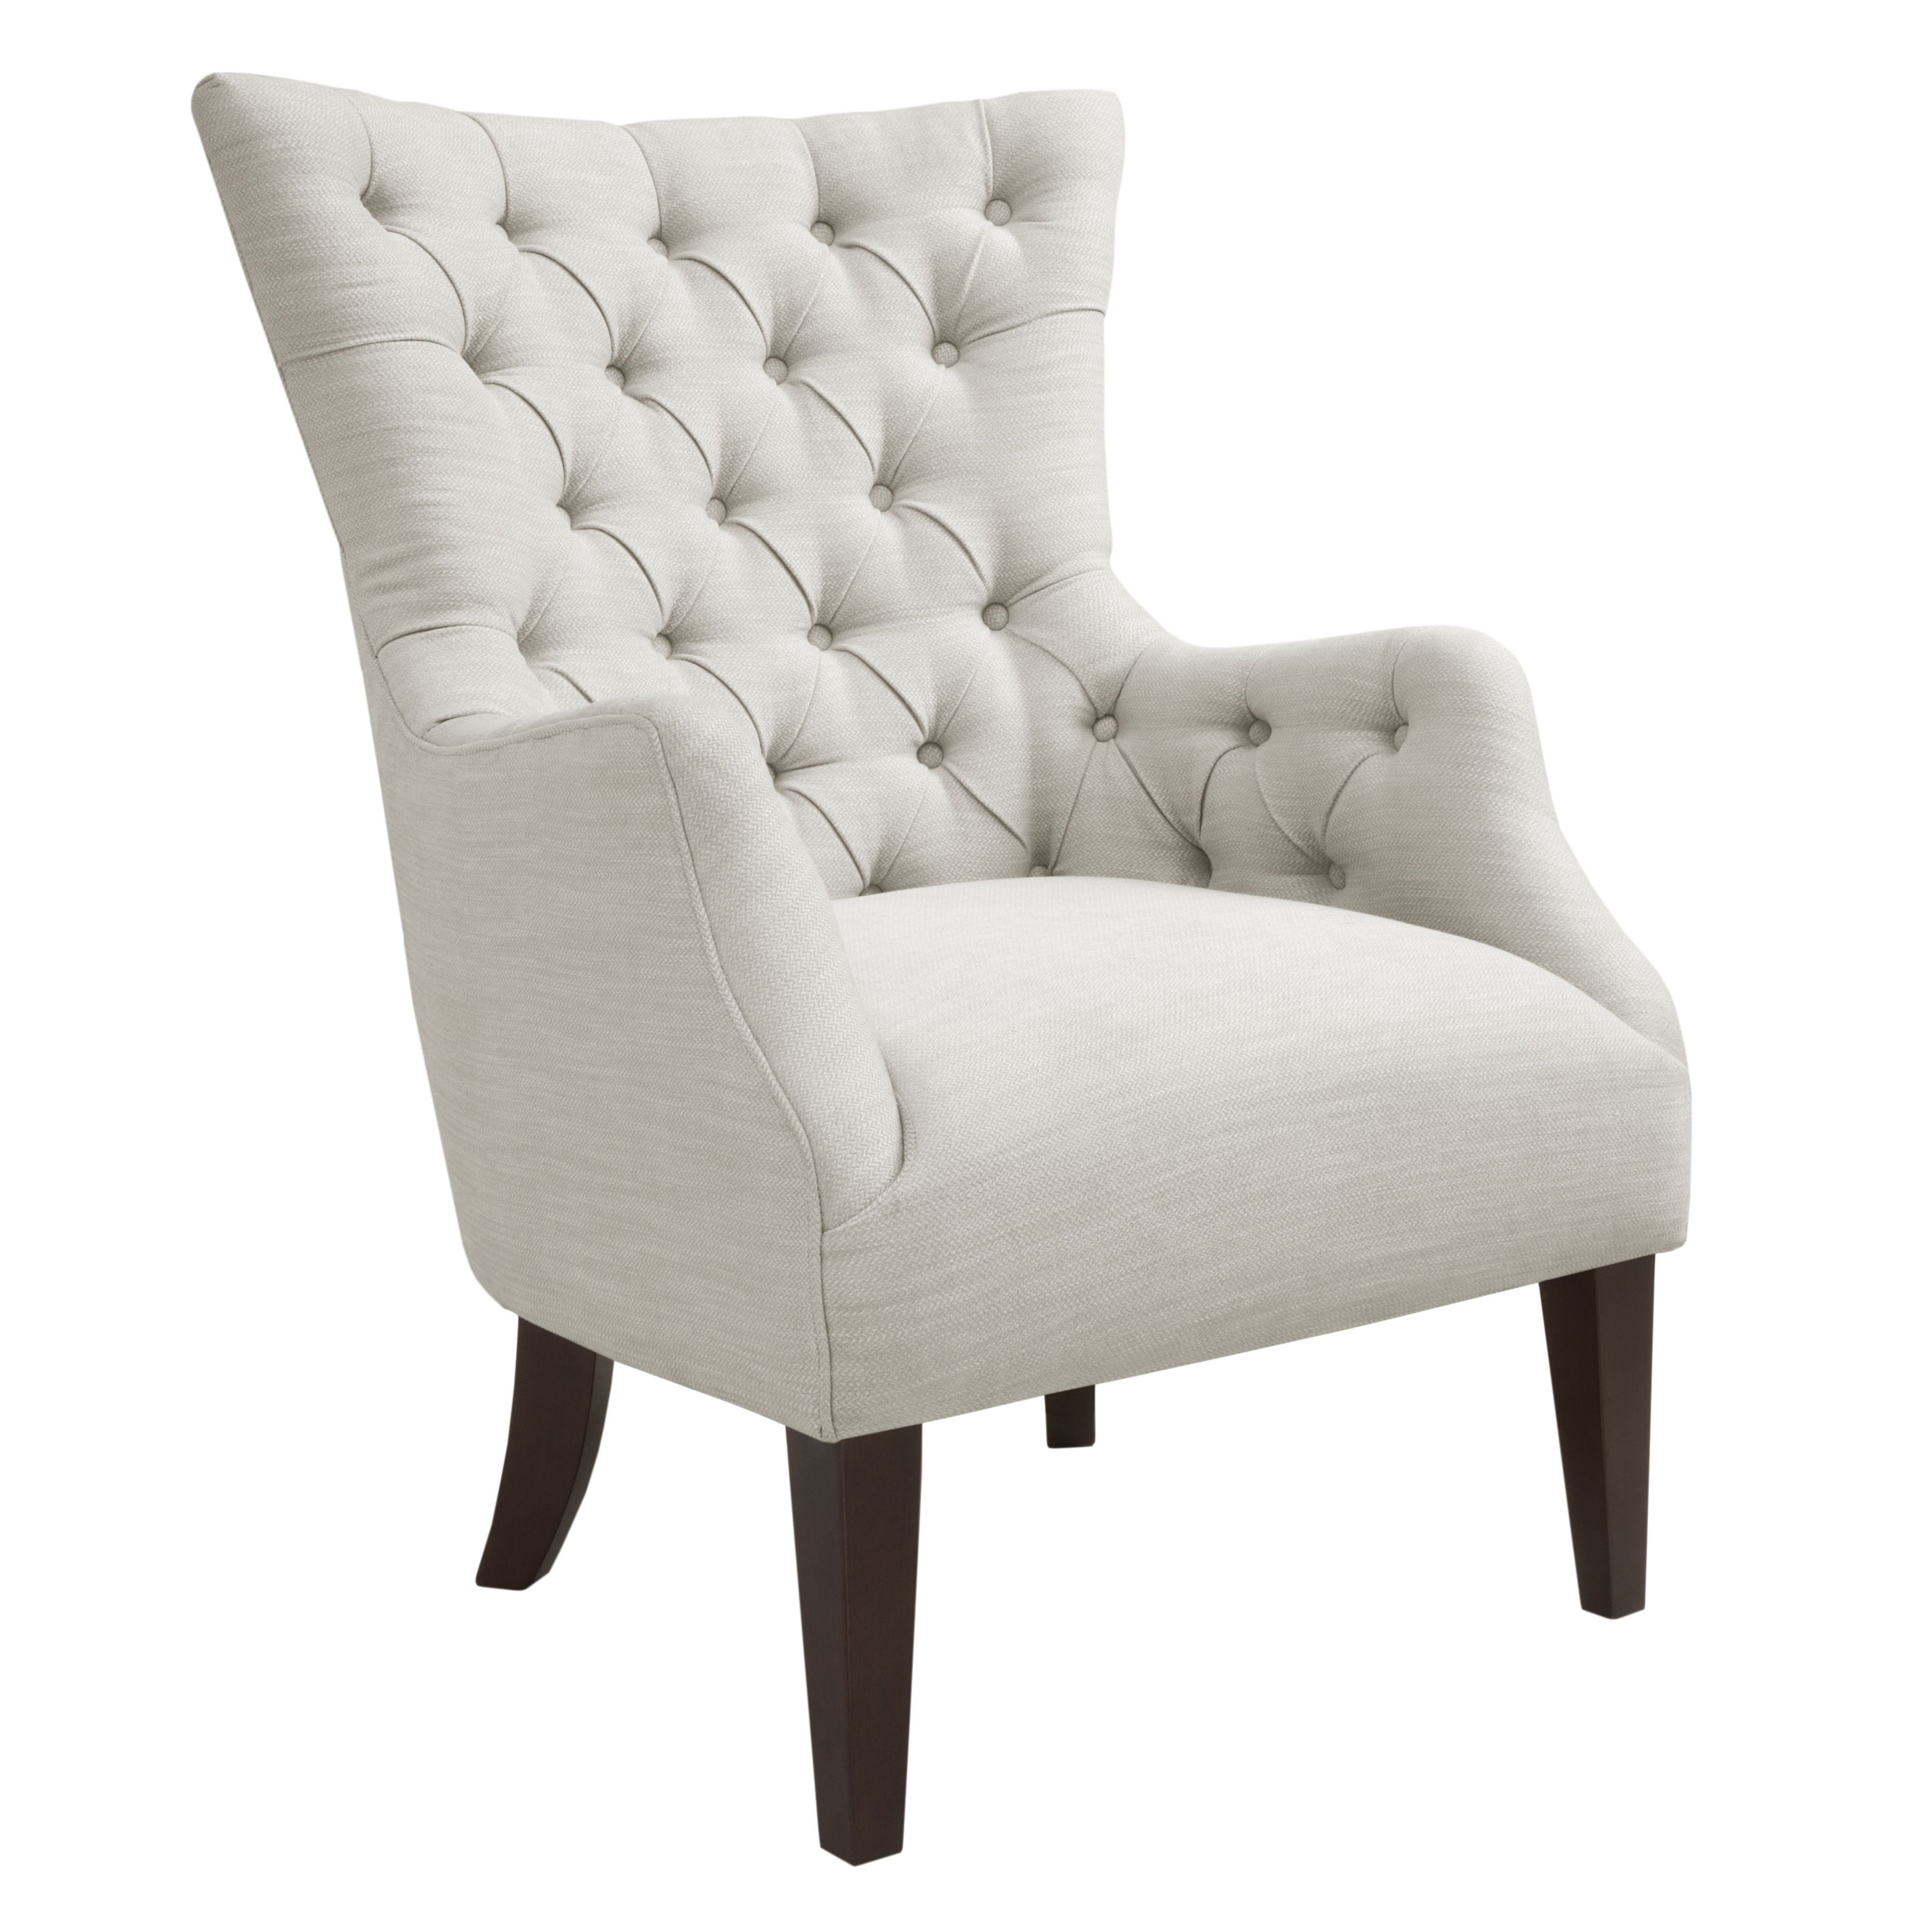 30.25” Wide Tufted Wingback Chair